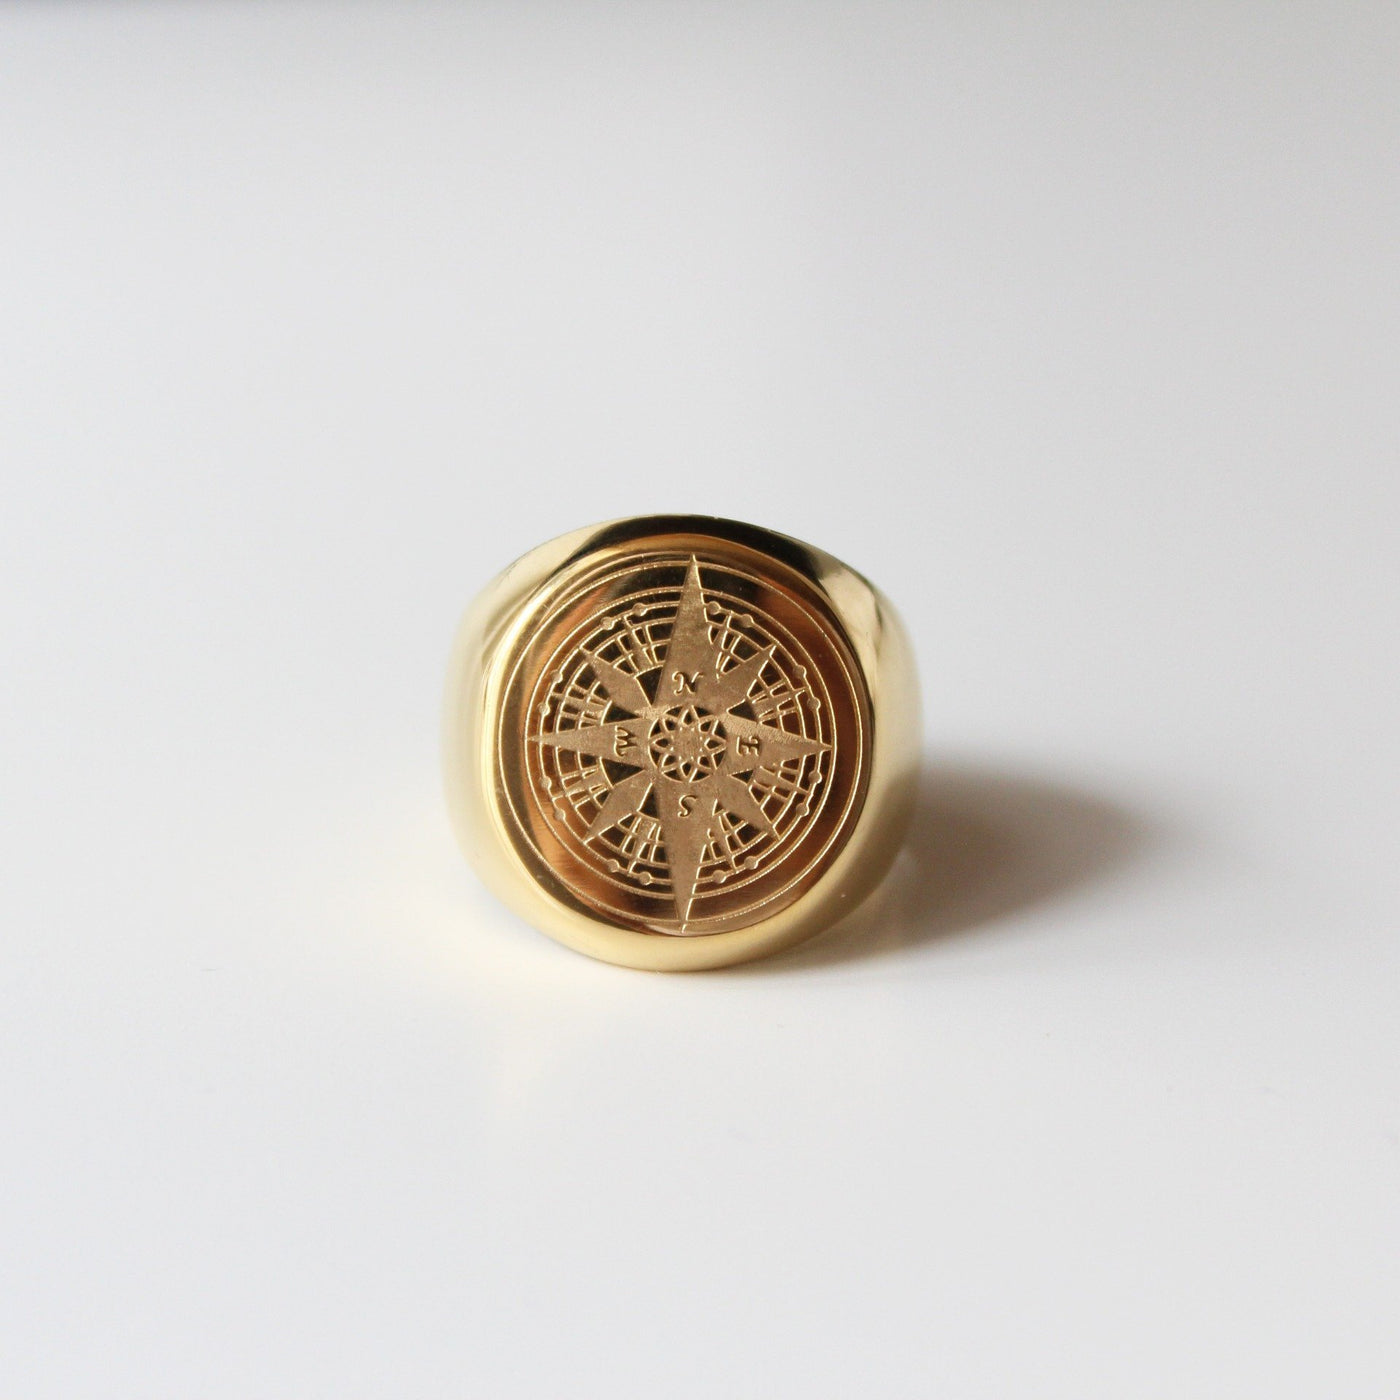 Compass World Map Ring - Maral Kunst Jewelry